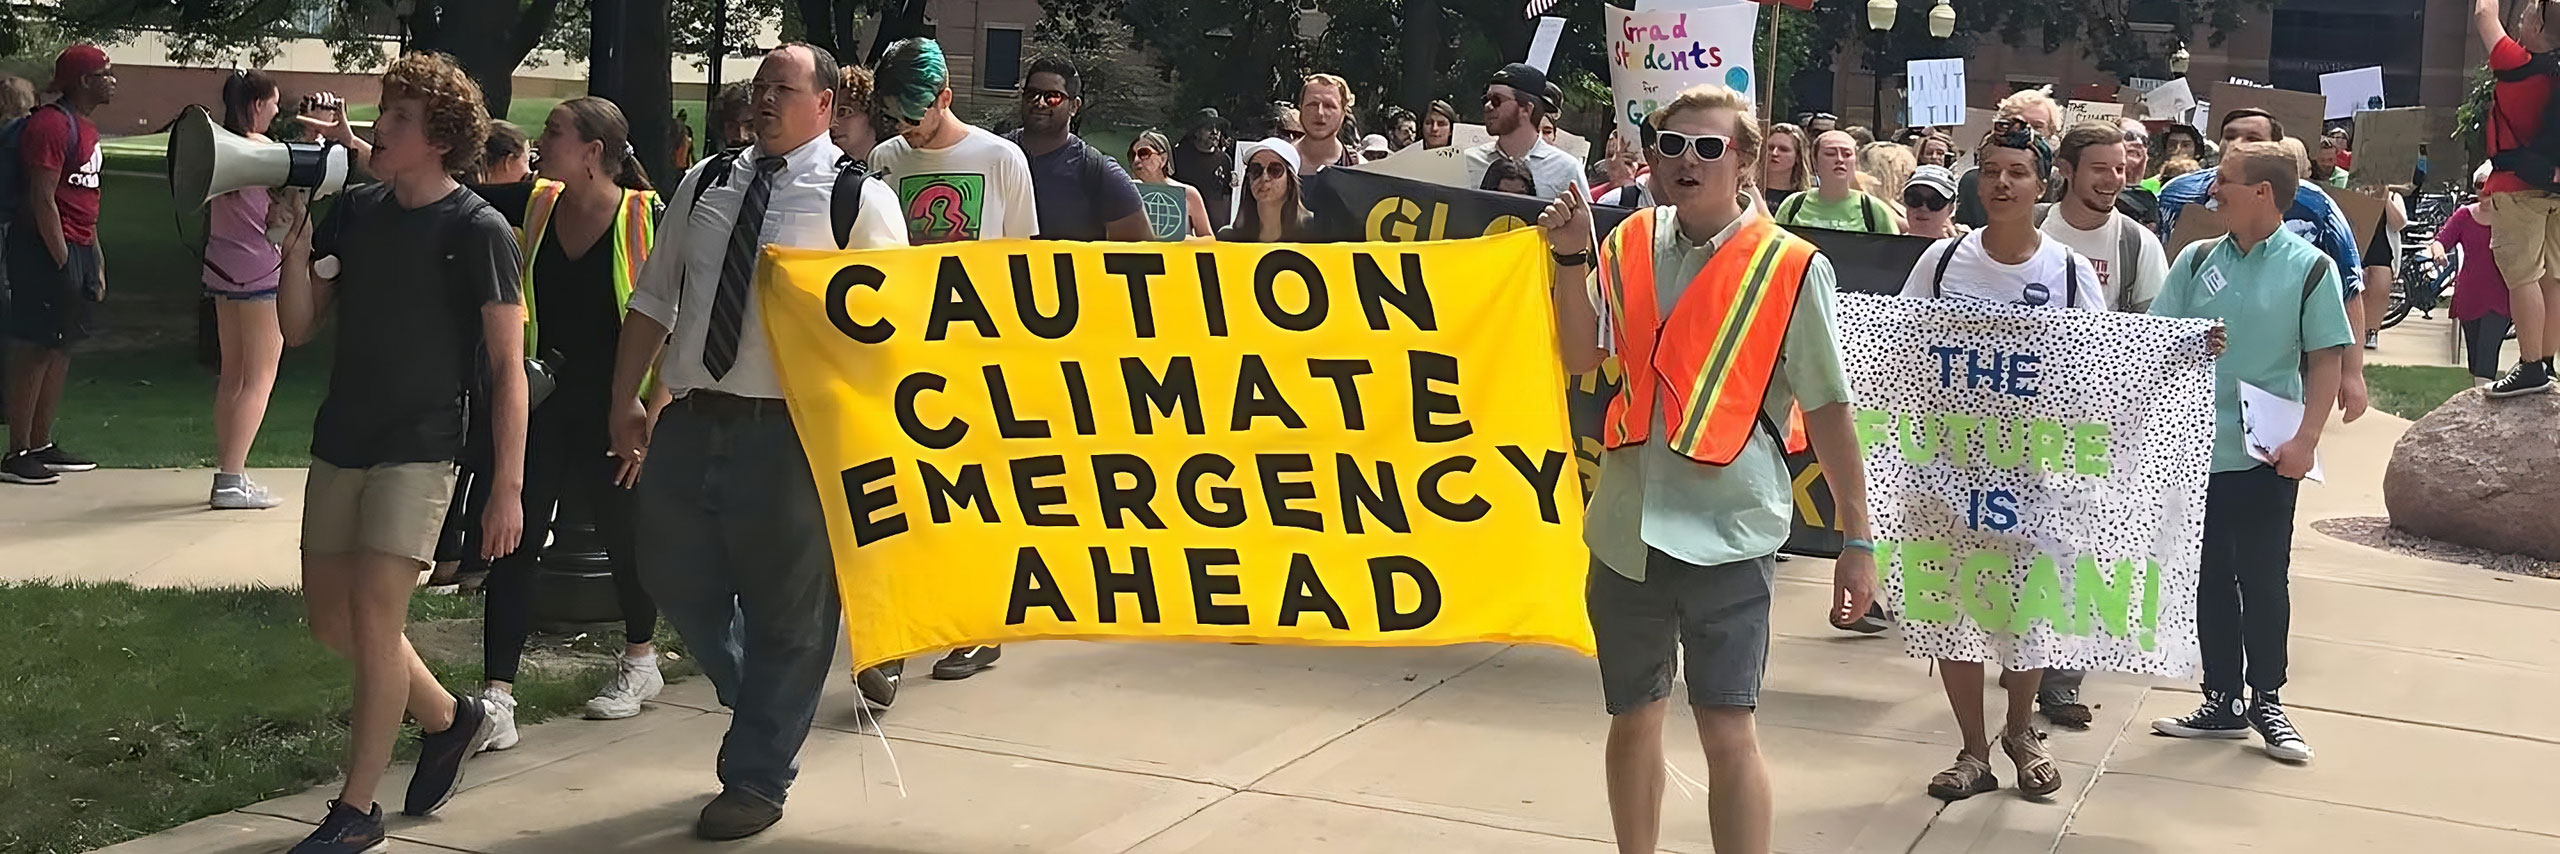 Student activists holding a sign saying 'Caution Climate Emergency'.